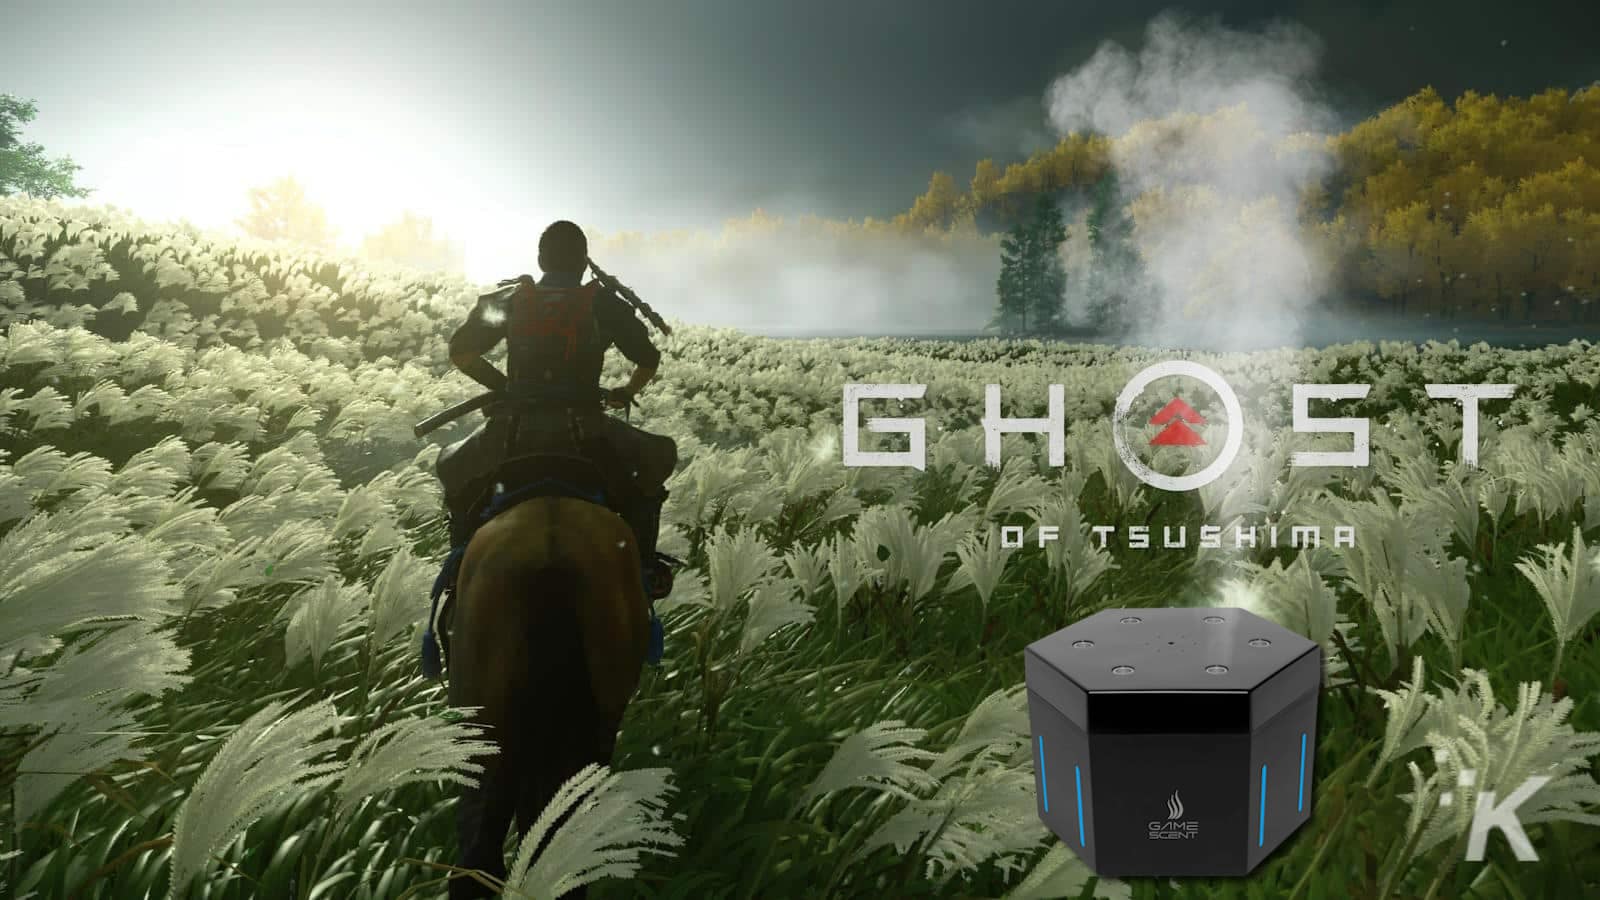 Ghost of tsushima background with gamescent